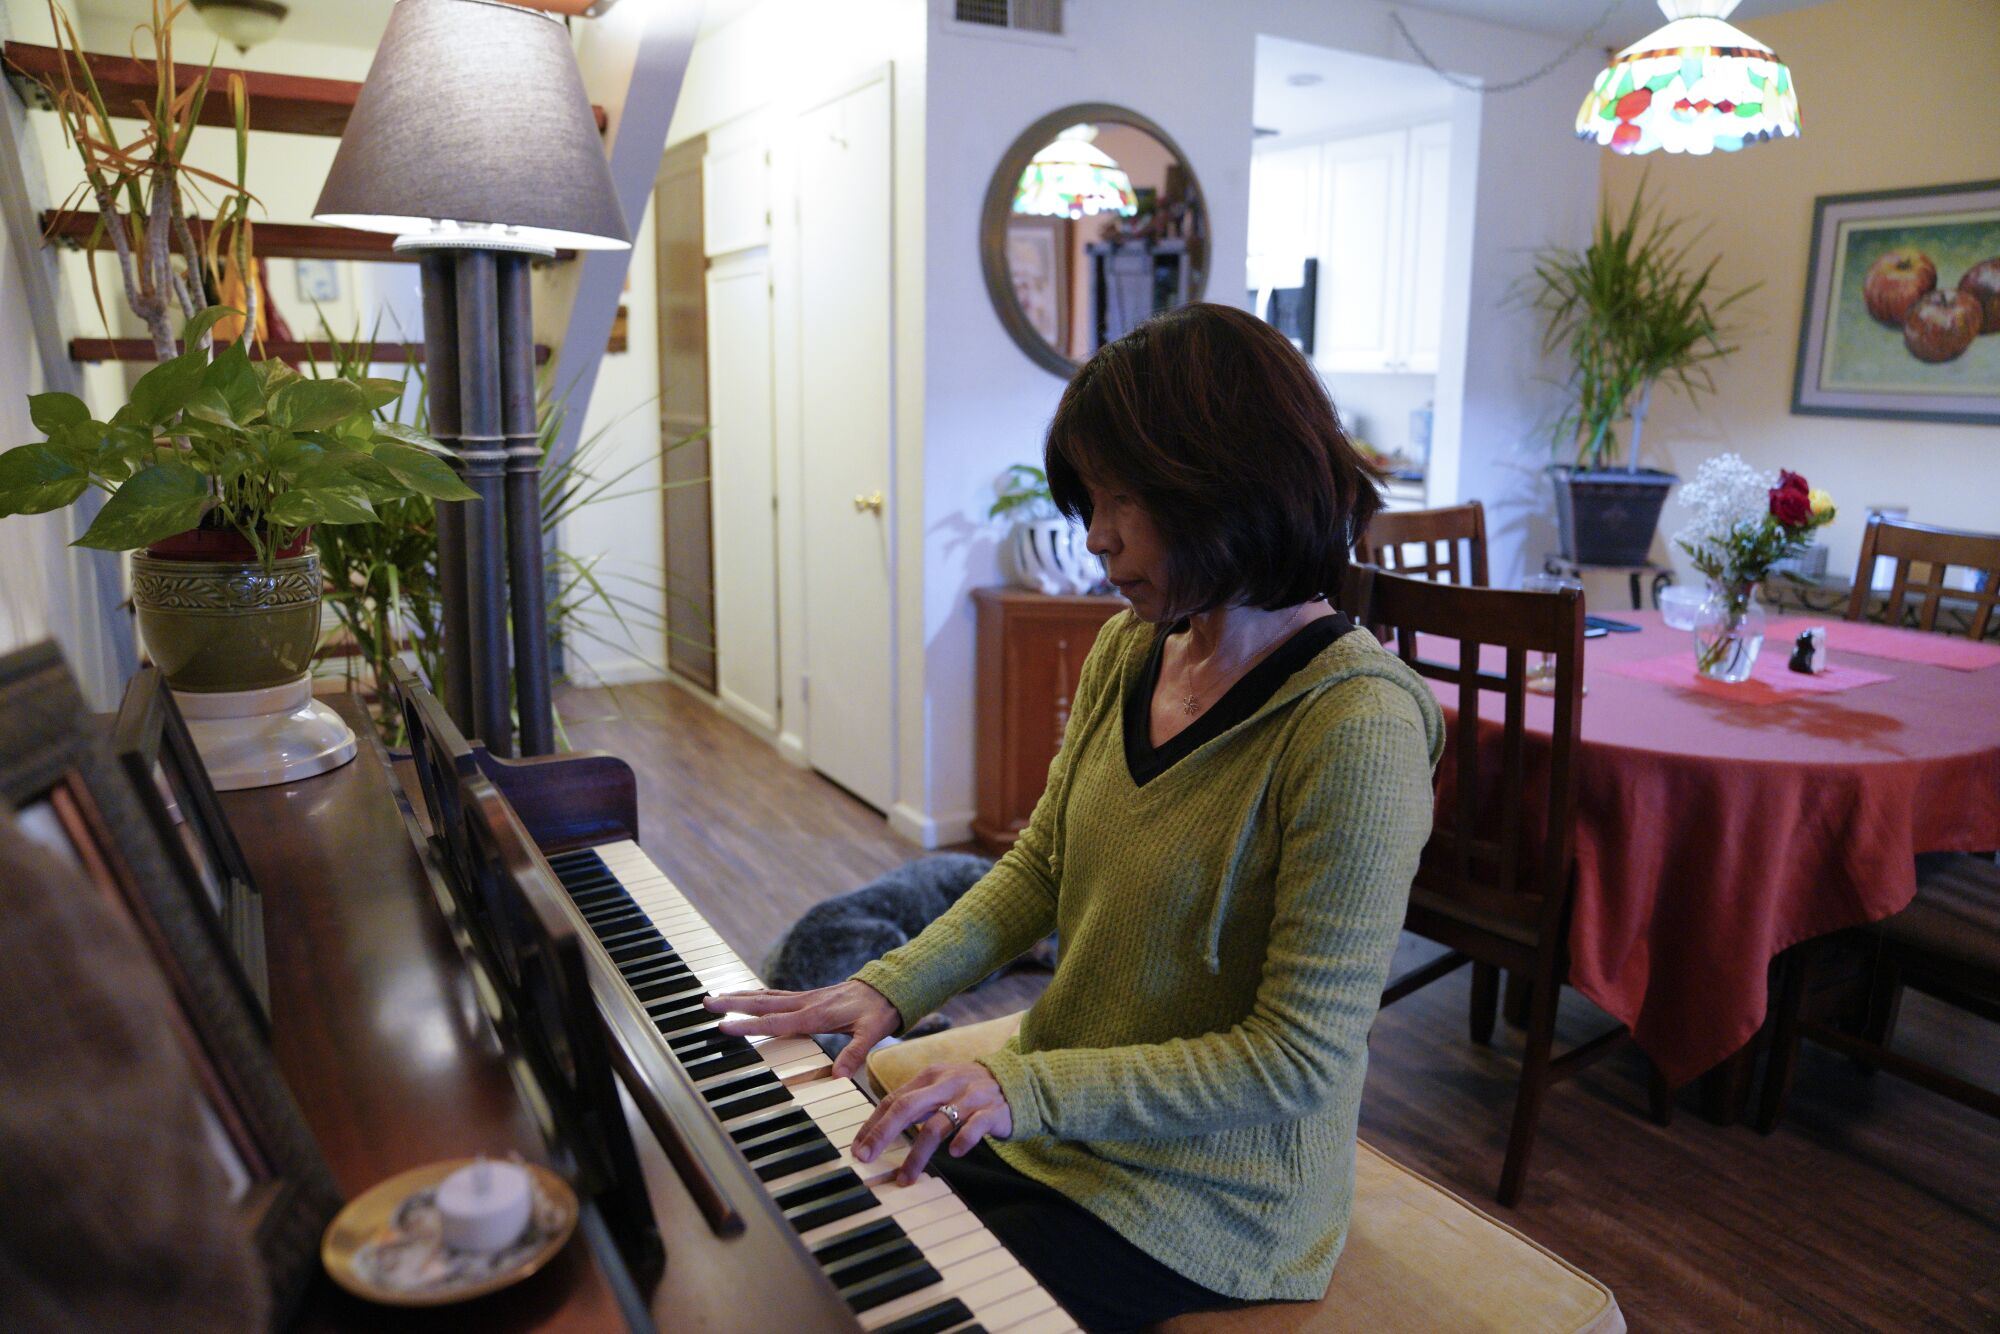 At her home in Santee, Carmen Kcomt plays the piano